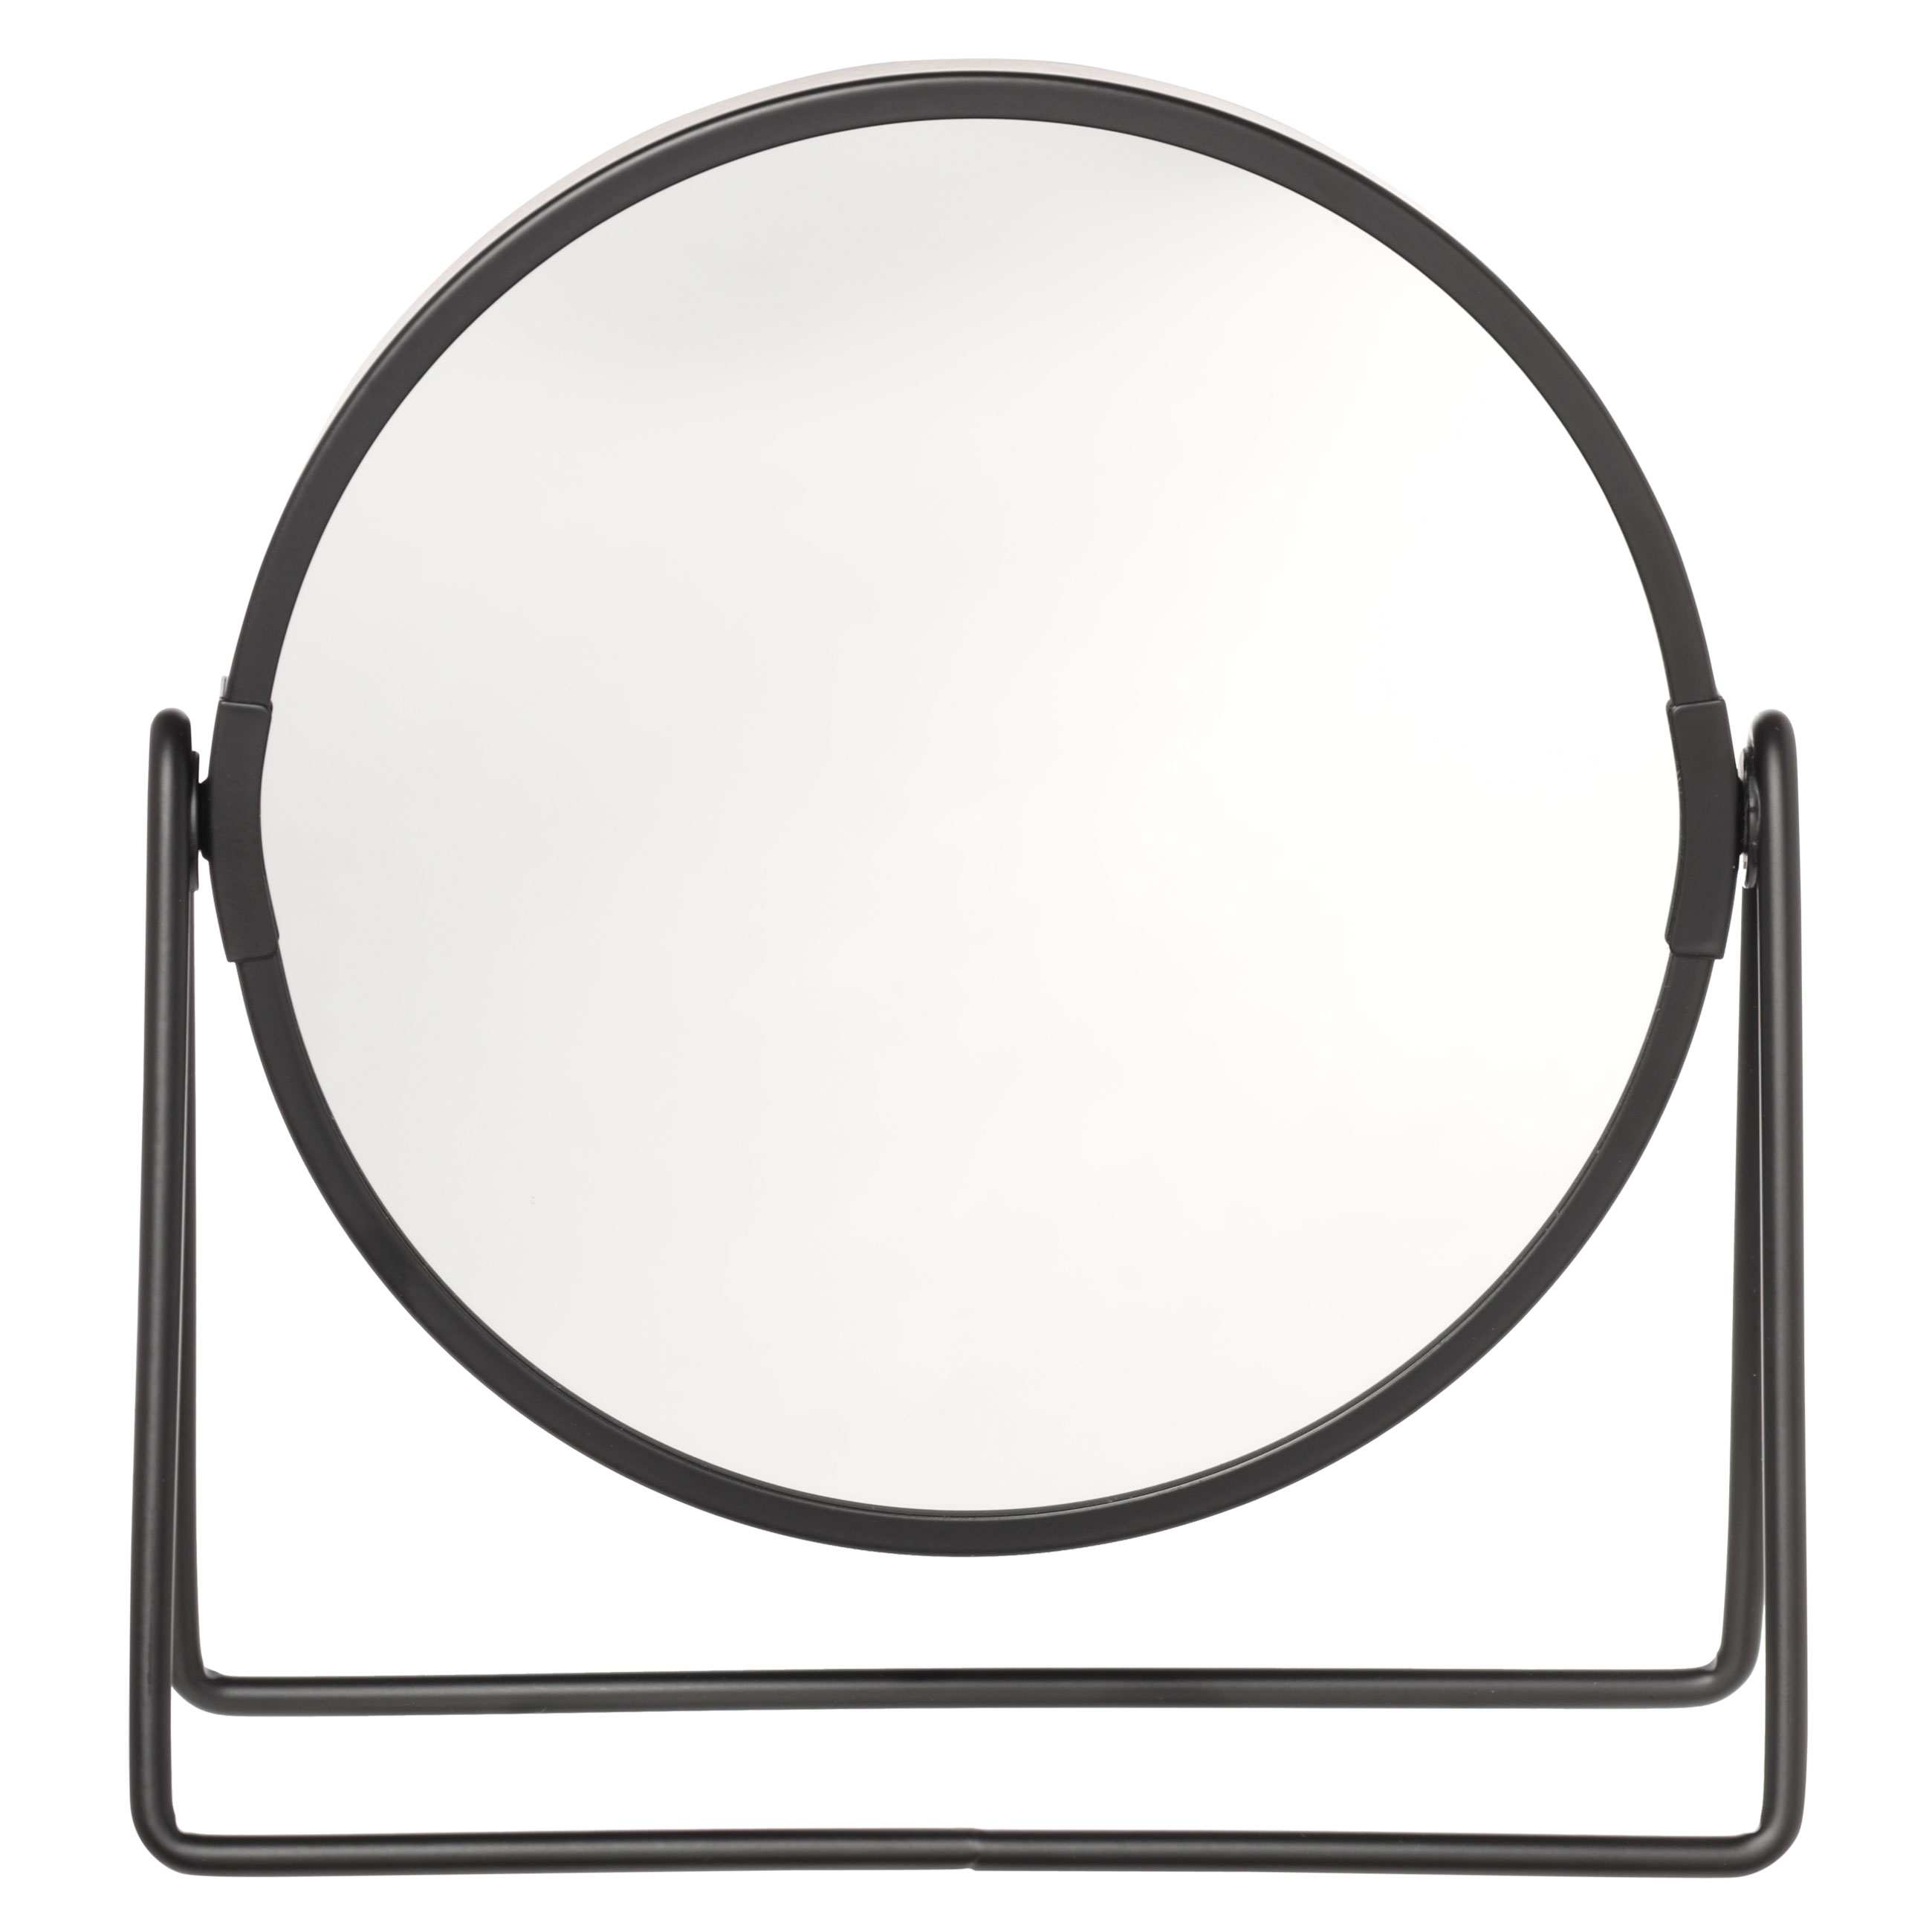 Table mirror, 20 cm, double-sided, metal, round, Black, Graphic изображение № 2